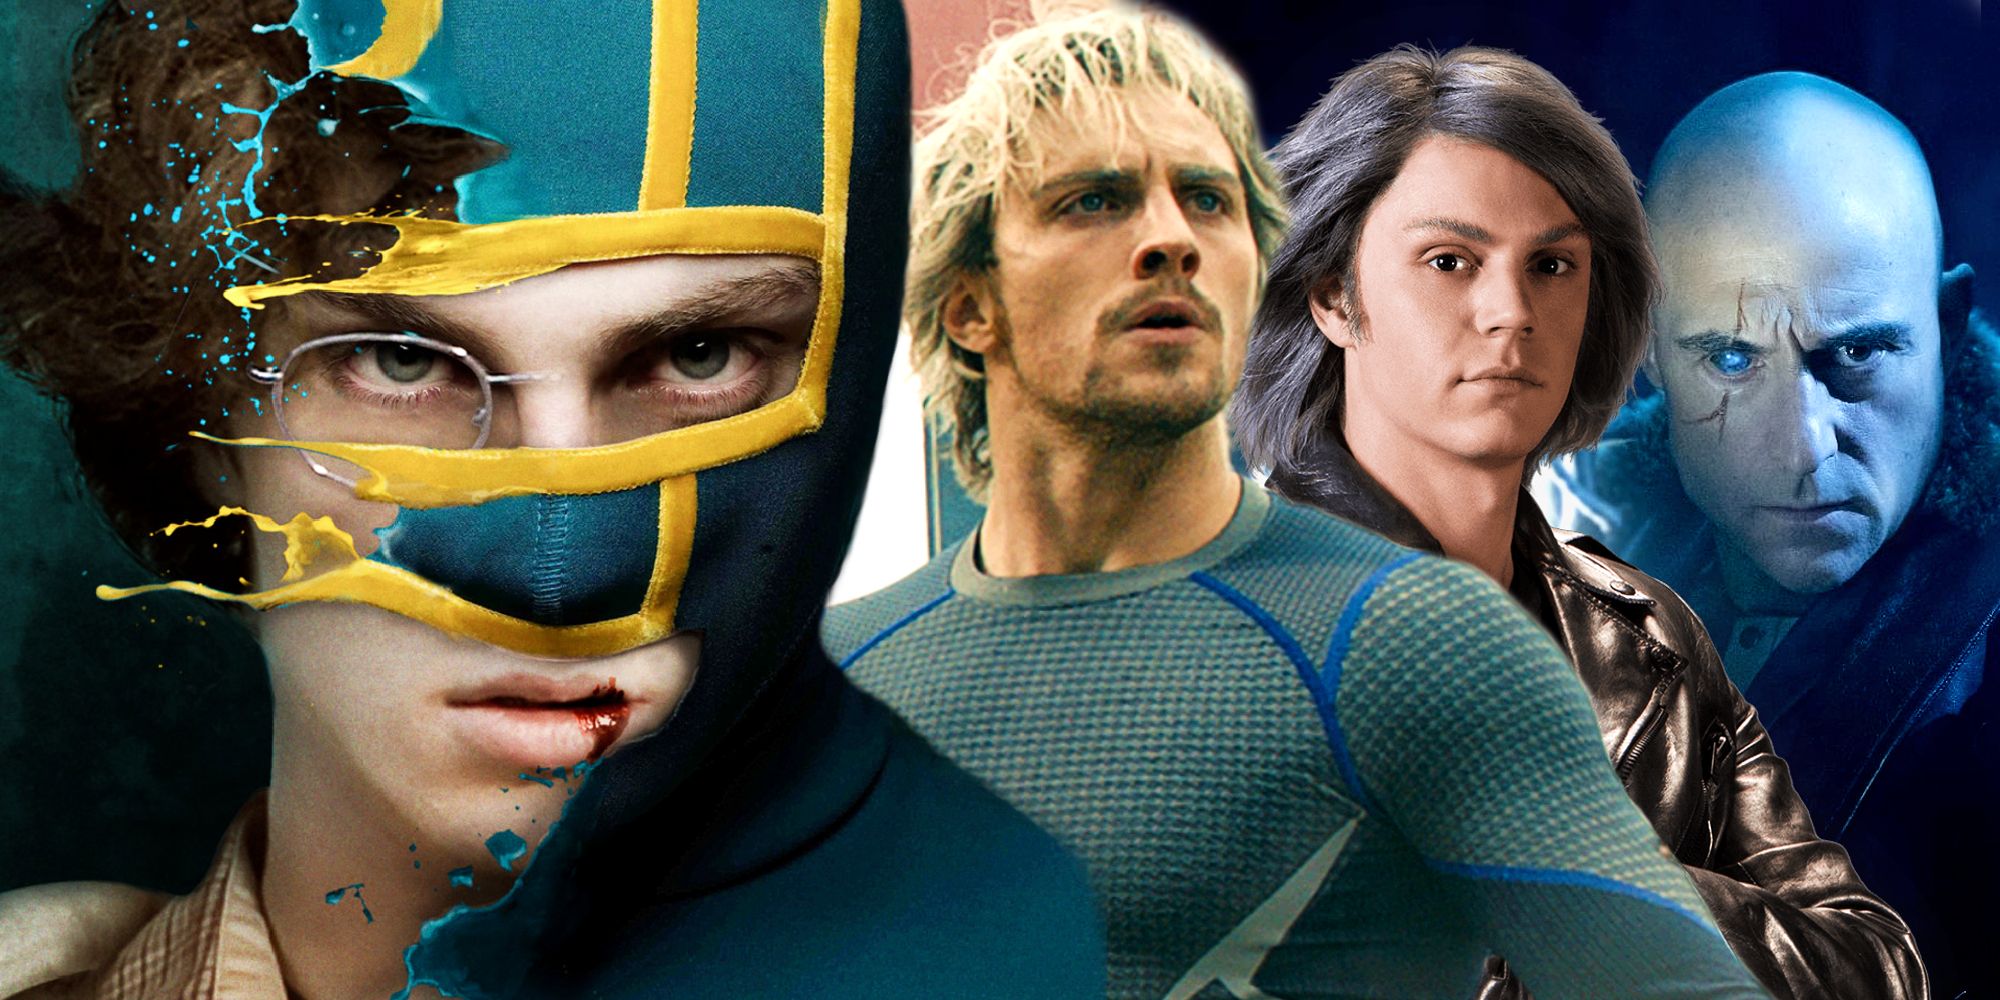 Aaron-Taylor Johnson, Evan Peters, and Mark Strong in Kick-Ass, the MCU, and the DCEU